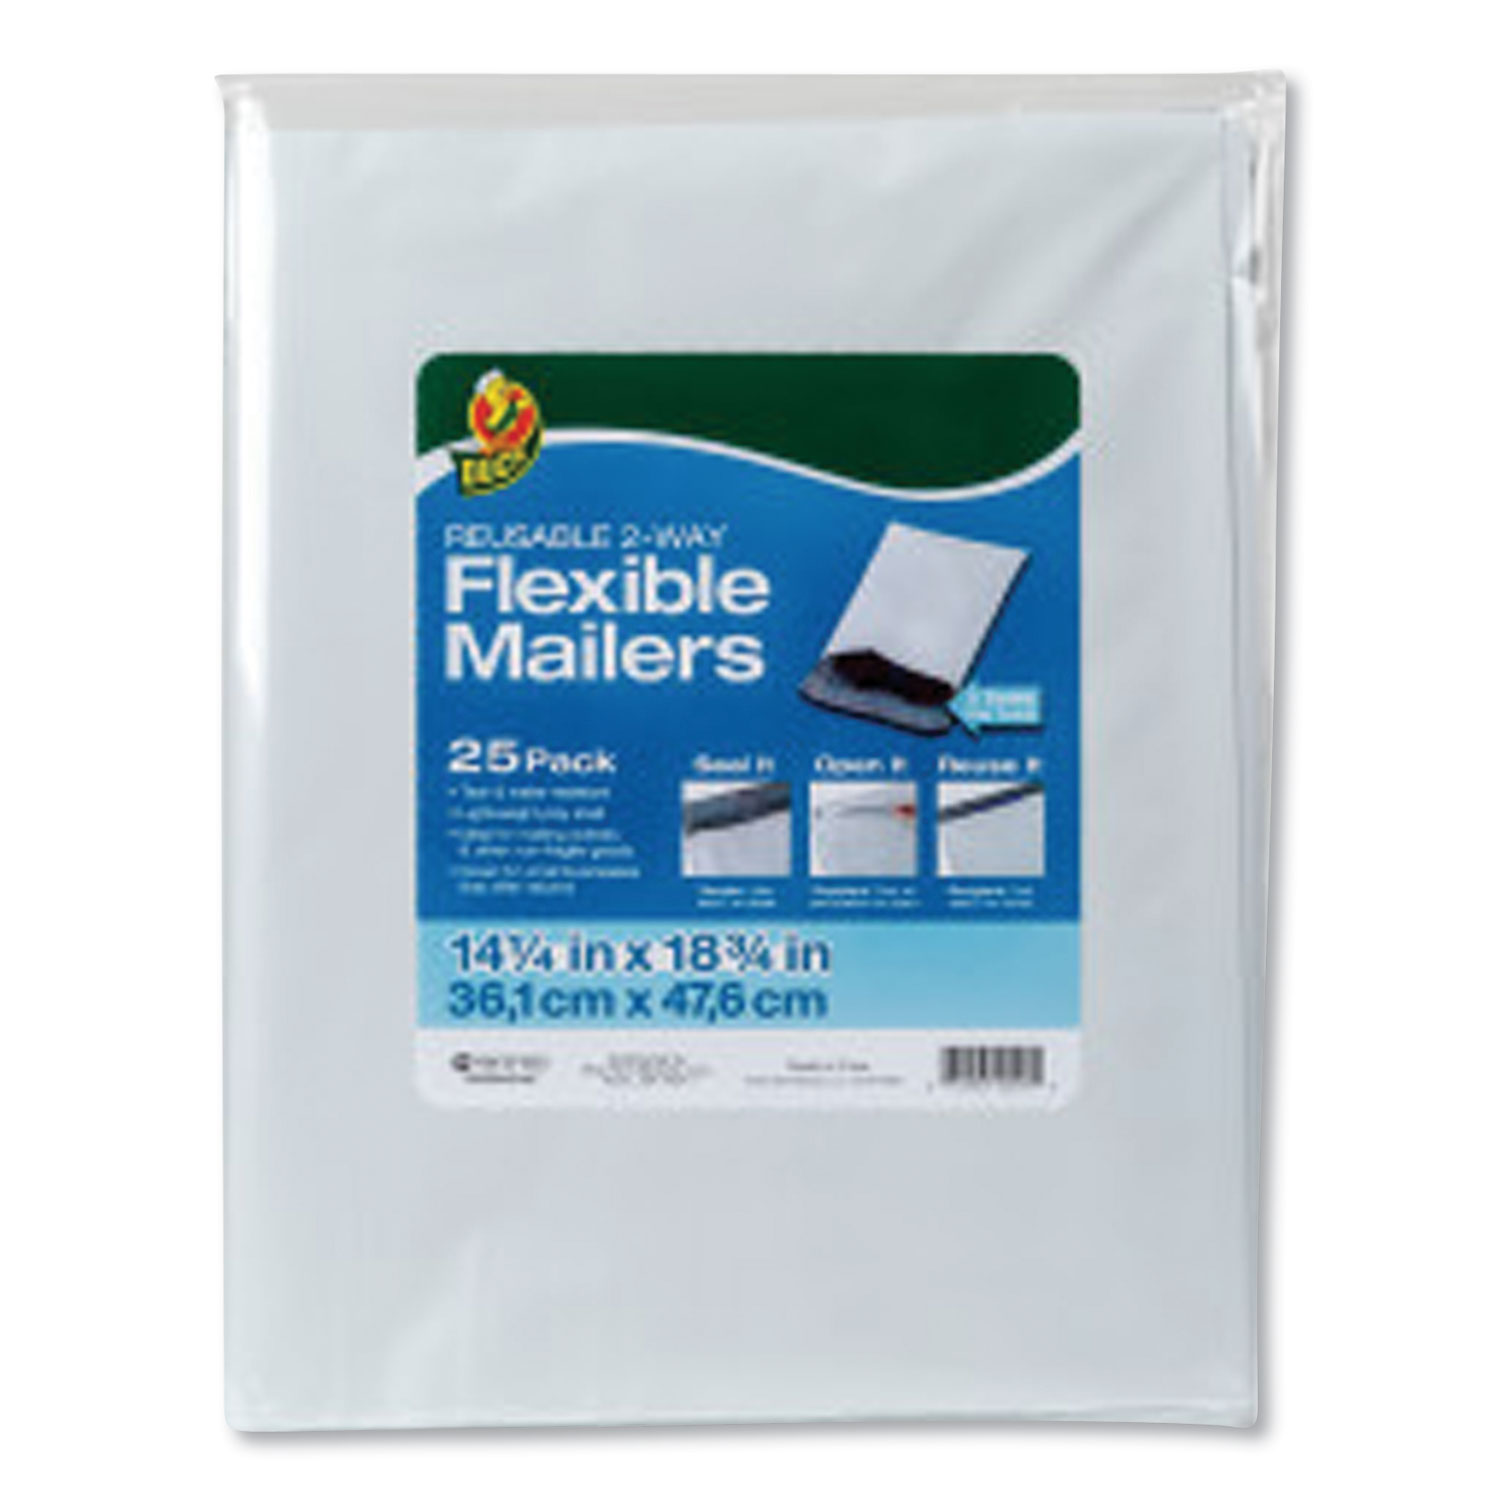  Duck 286340 Reusable 2-Way Flexible Mailers, Self-Adhesive Closure, 14.25 x 18.75, White, 25/Pack (DUC286340) 